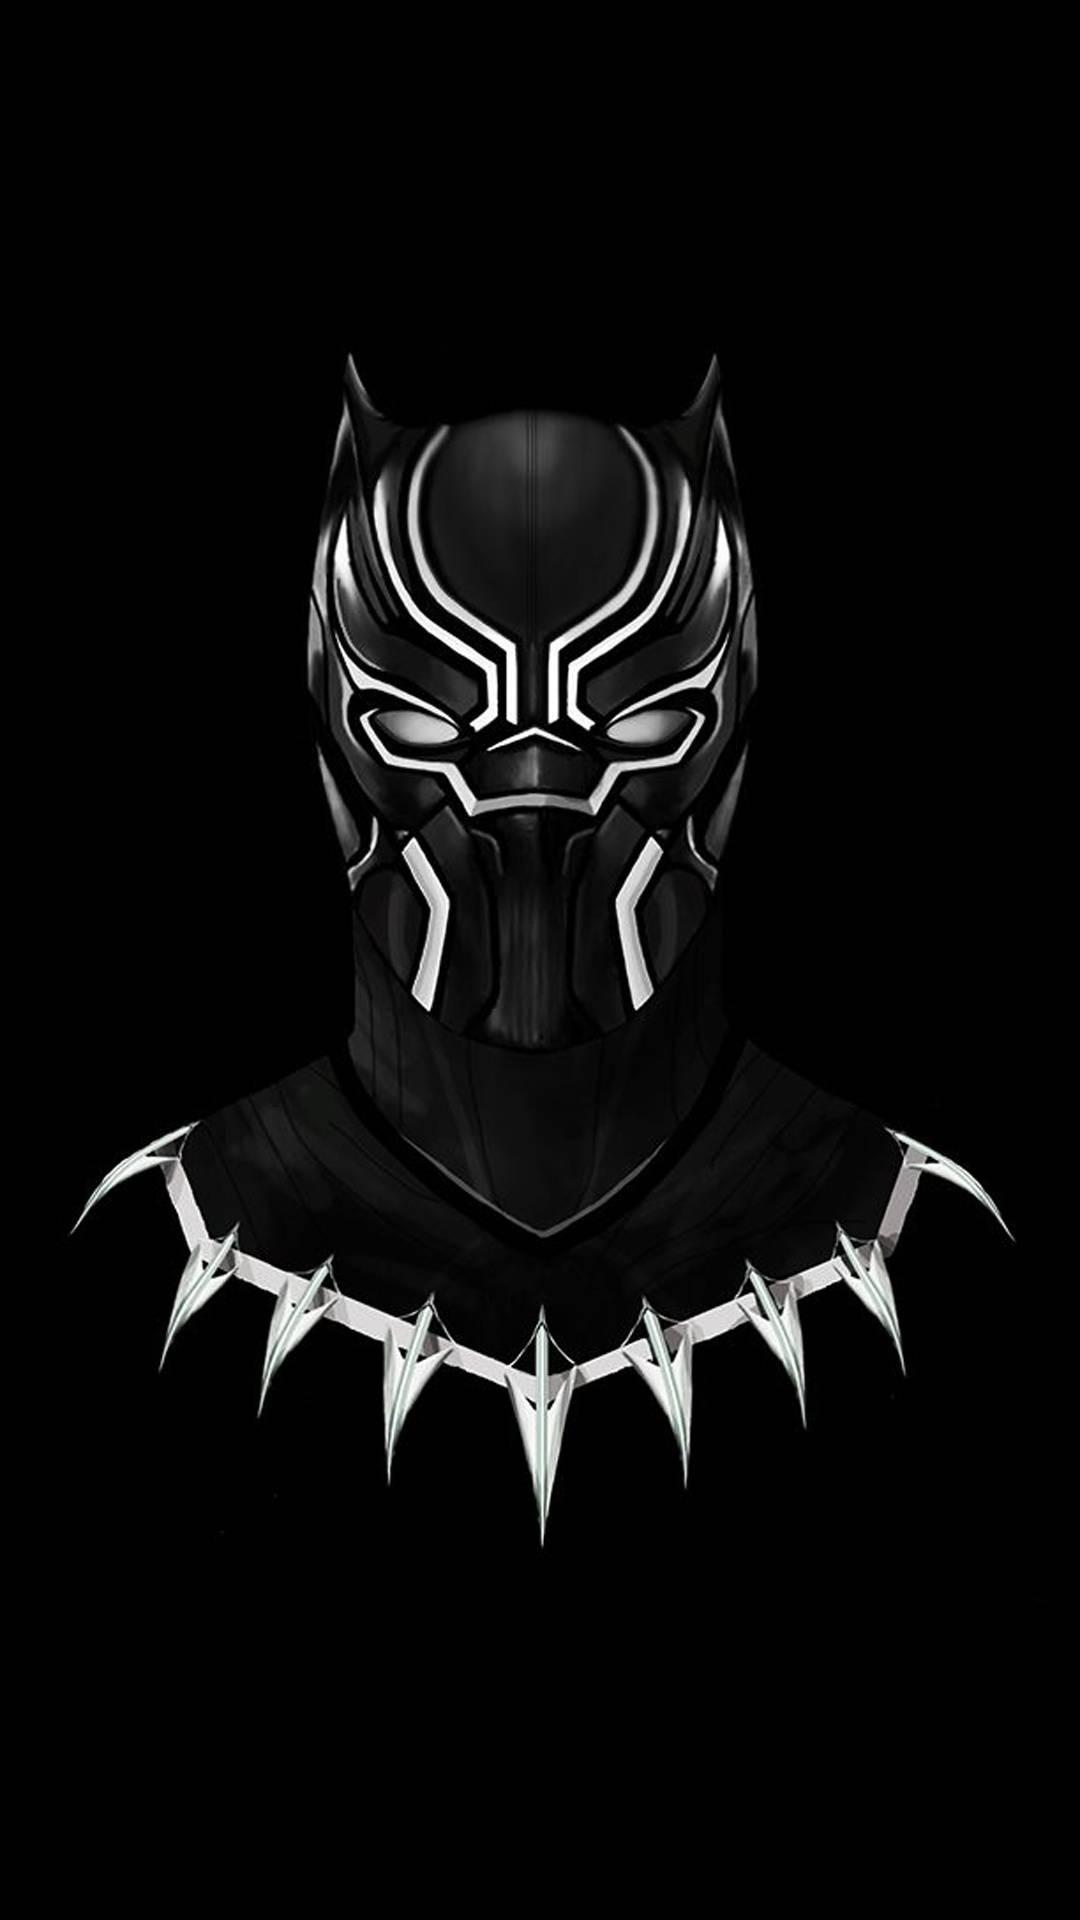 Black panther. Best for AMOLED screens 1080x1920